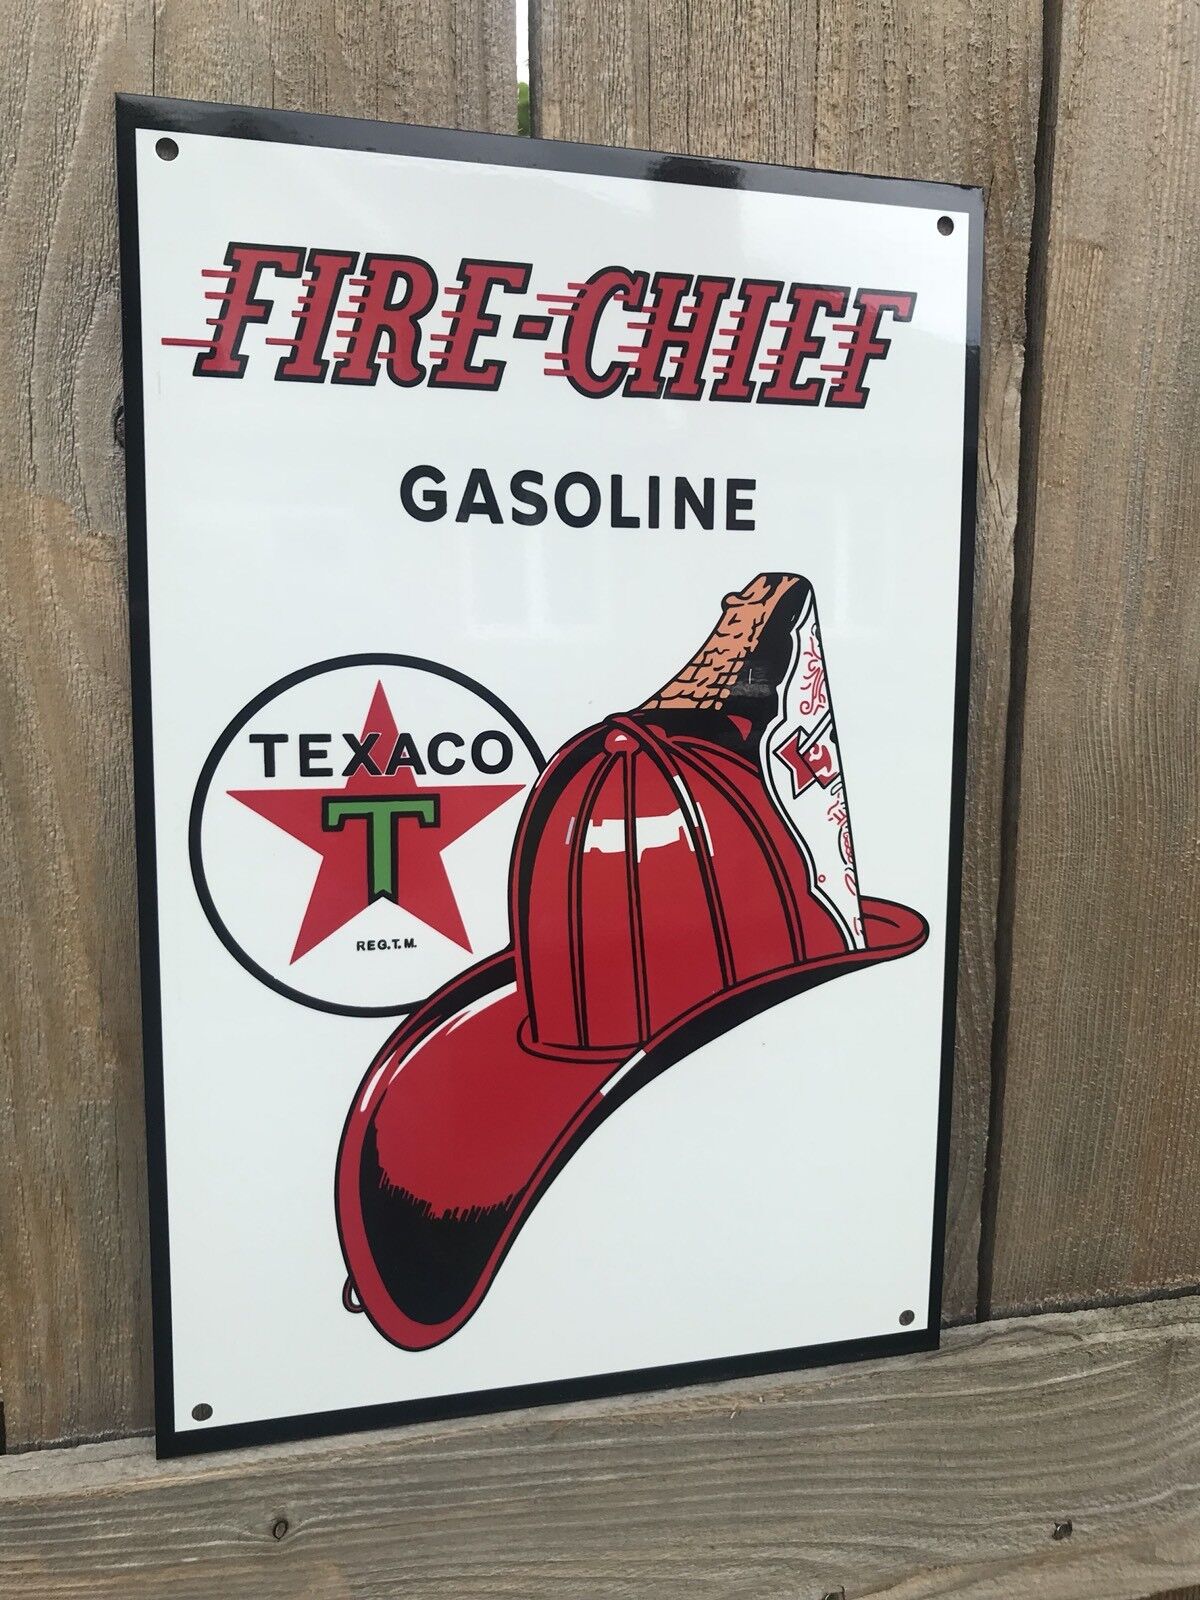 Texaco Fire Chief Gasoline metal sign baked Oil Gas Pump Plate